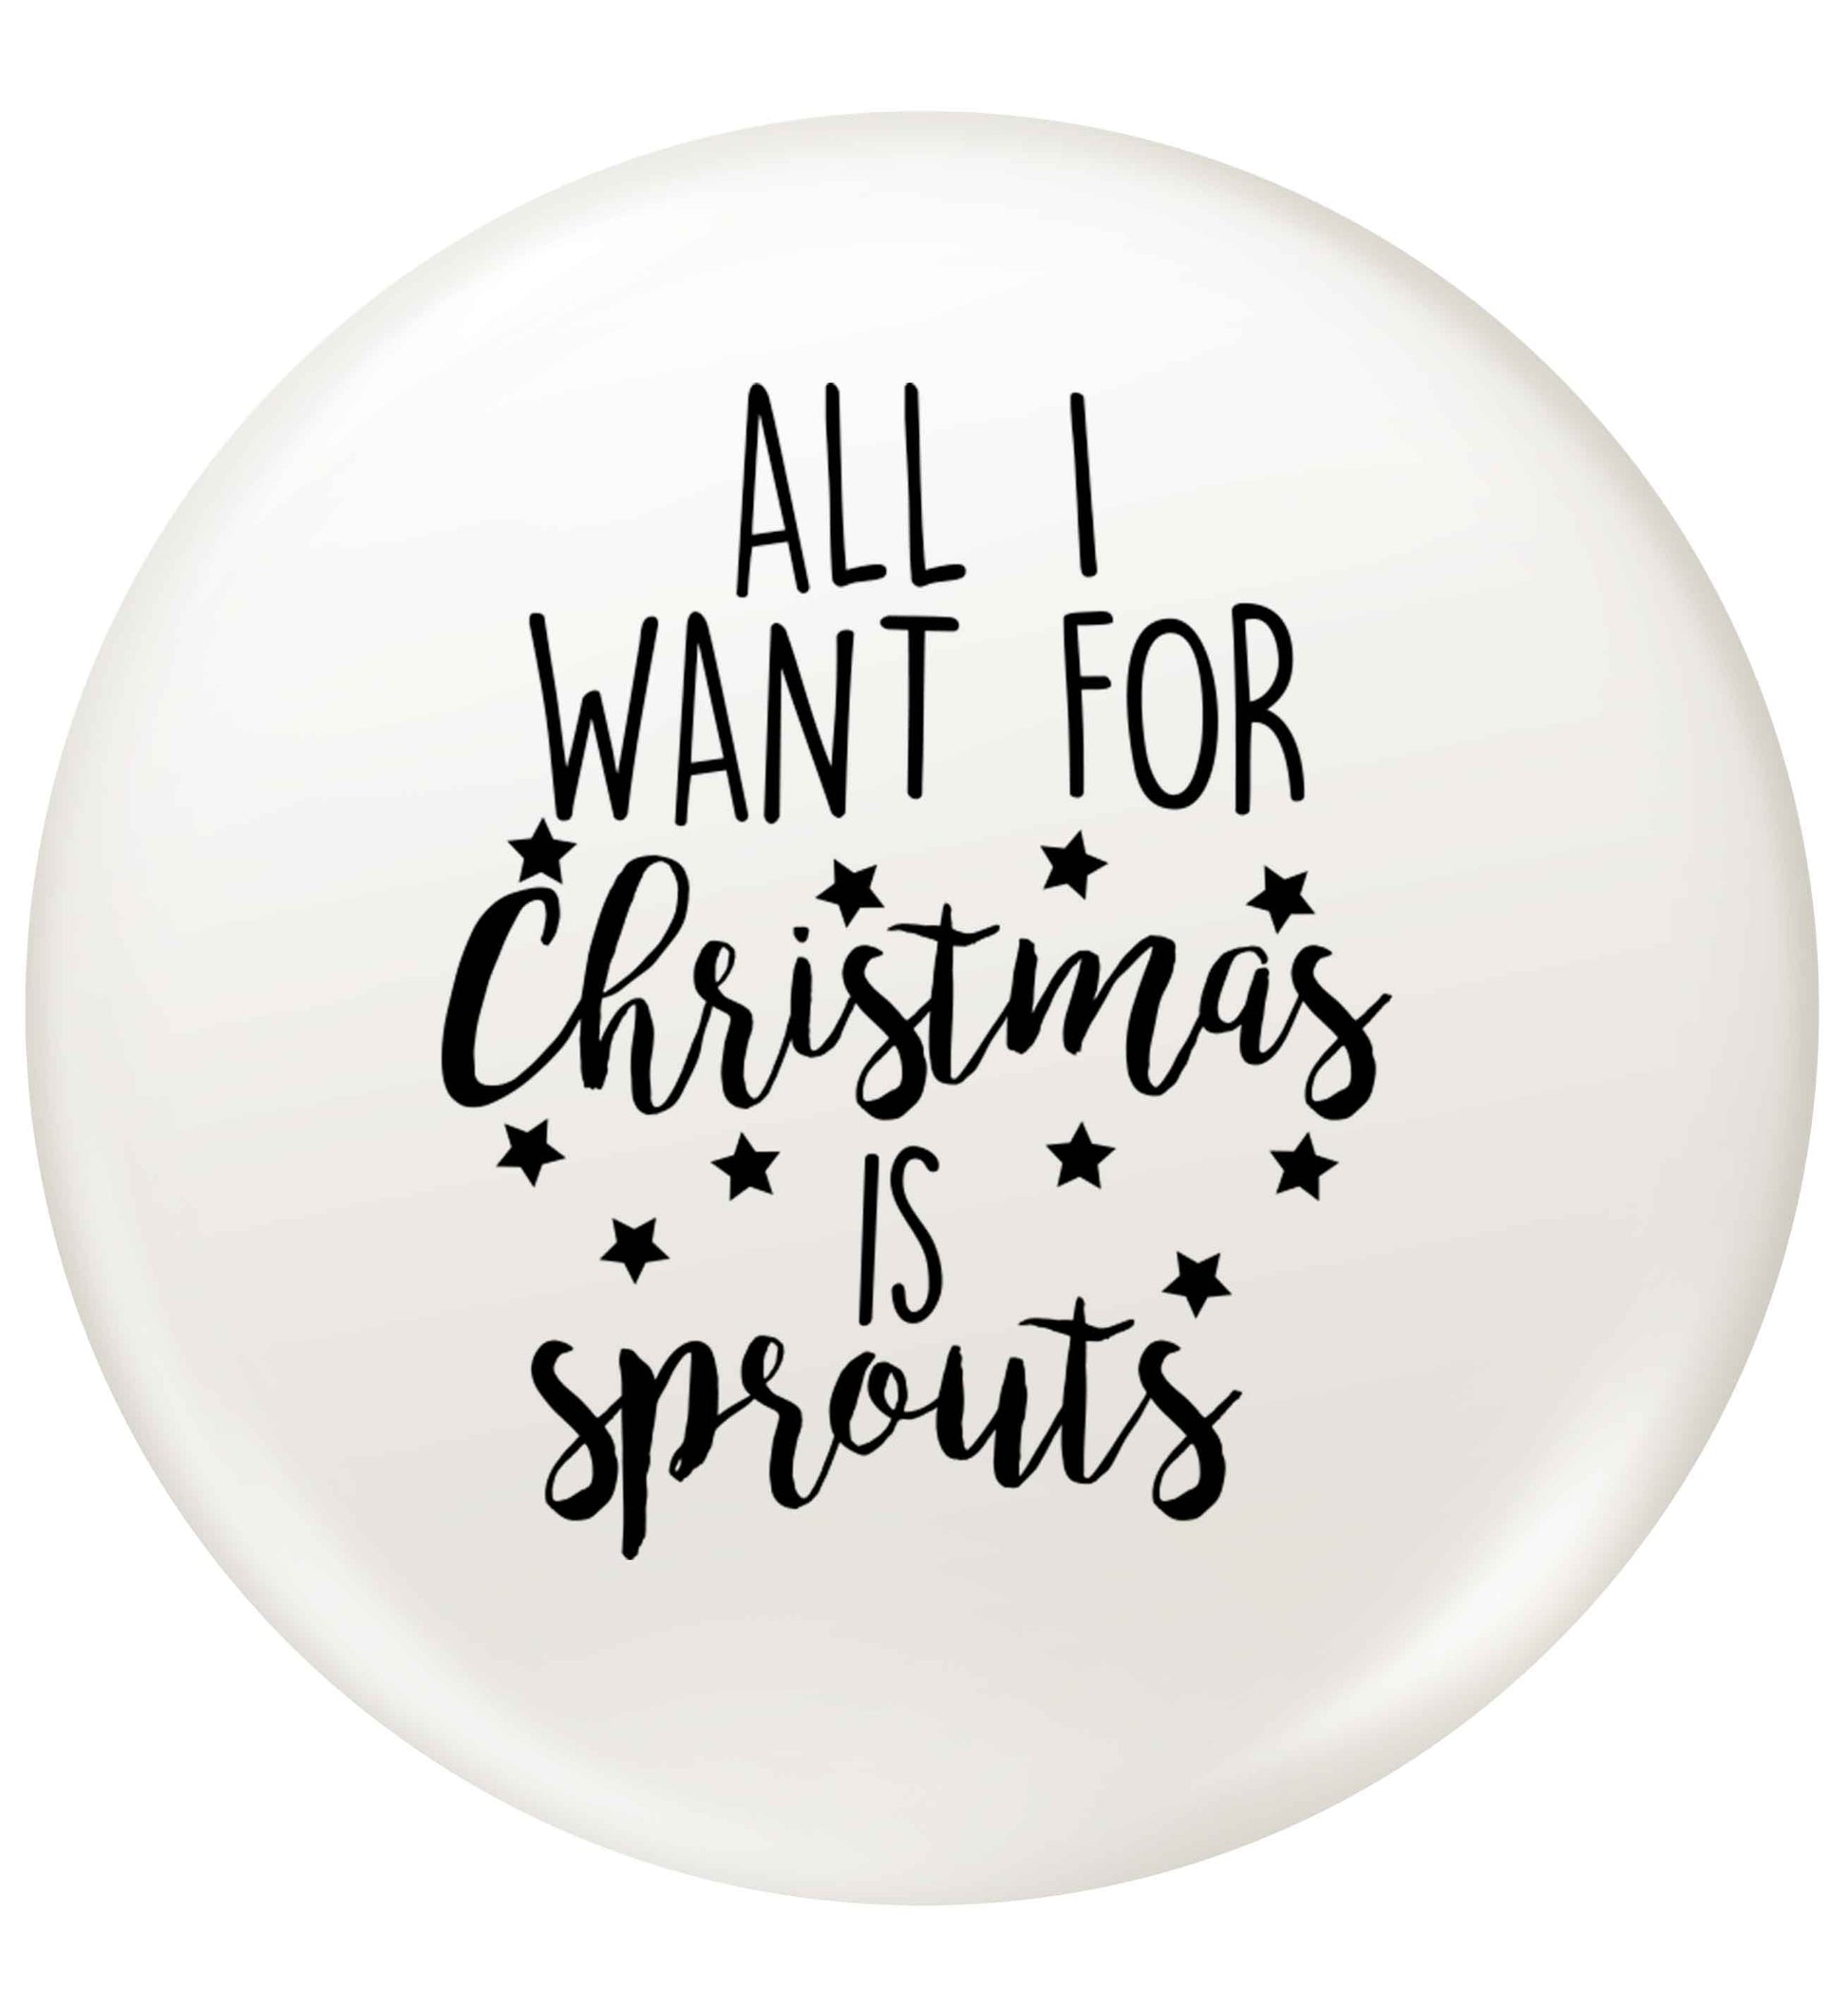 All I want for Christmas is sprouts small 25mm Pin badge